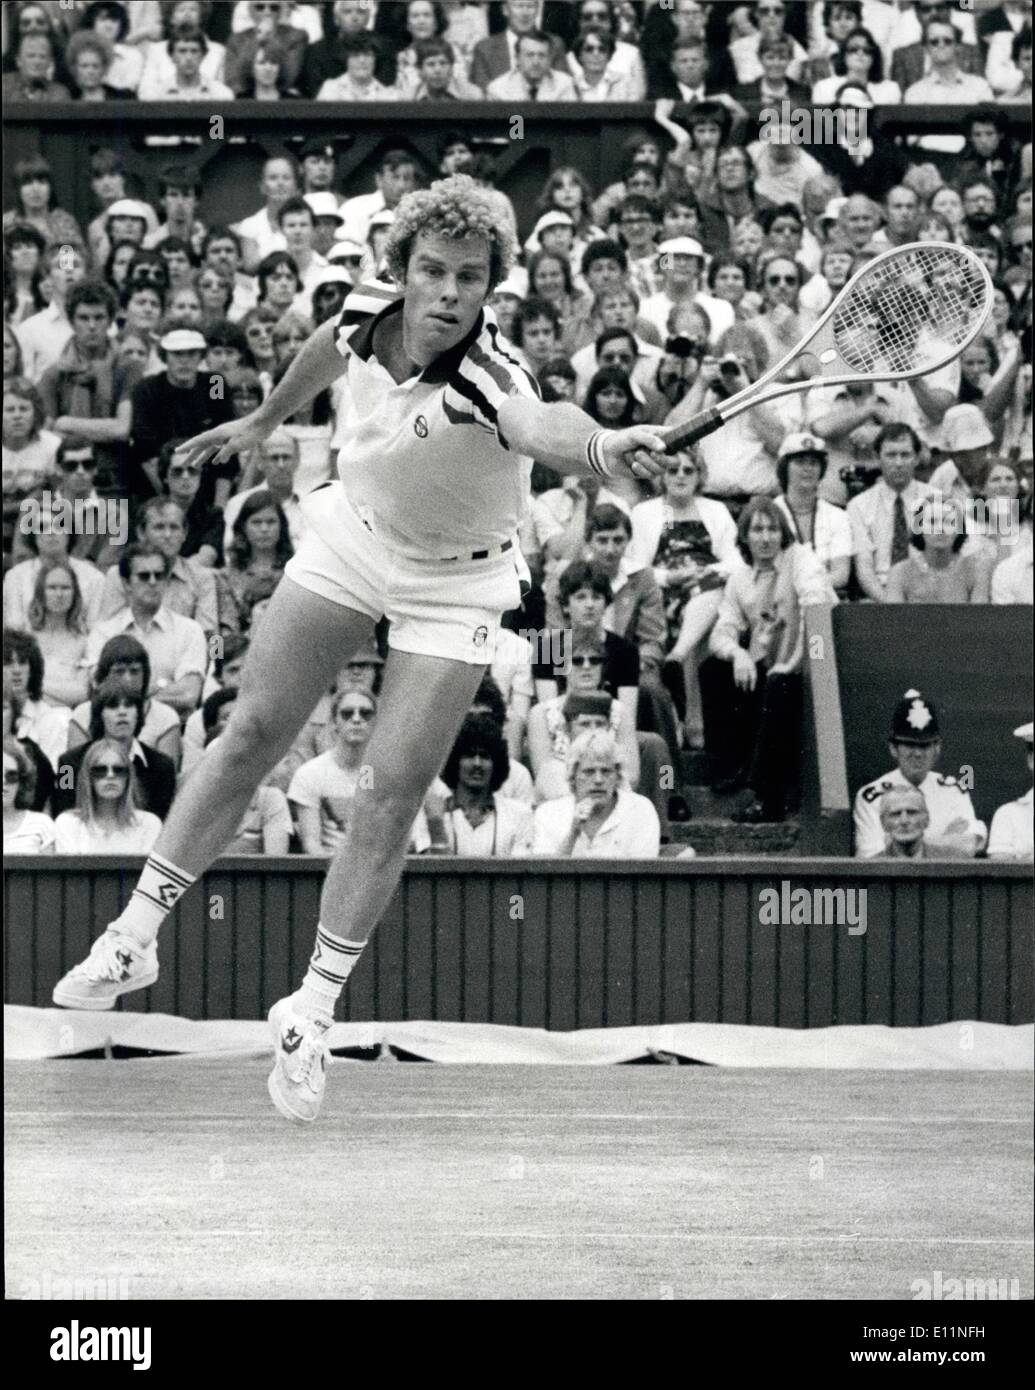 Jul. 07, 1979 - Bjorn Borg wins his fourth seccessive Wimbledon title beating Roscoe Tanner in five sets.Today at the Centre Court at Wimbledon Bjorn Borg of Sweden won the men's singles title for the fourth seccessive time when he beat American Roscoe tanner in five sets. photo shows Roscoe Tanner seen in action against Bjorn Borg on the centre court at Wimbledon today. Stock Photo